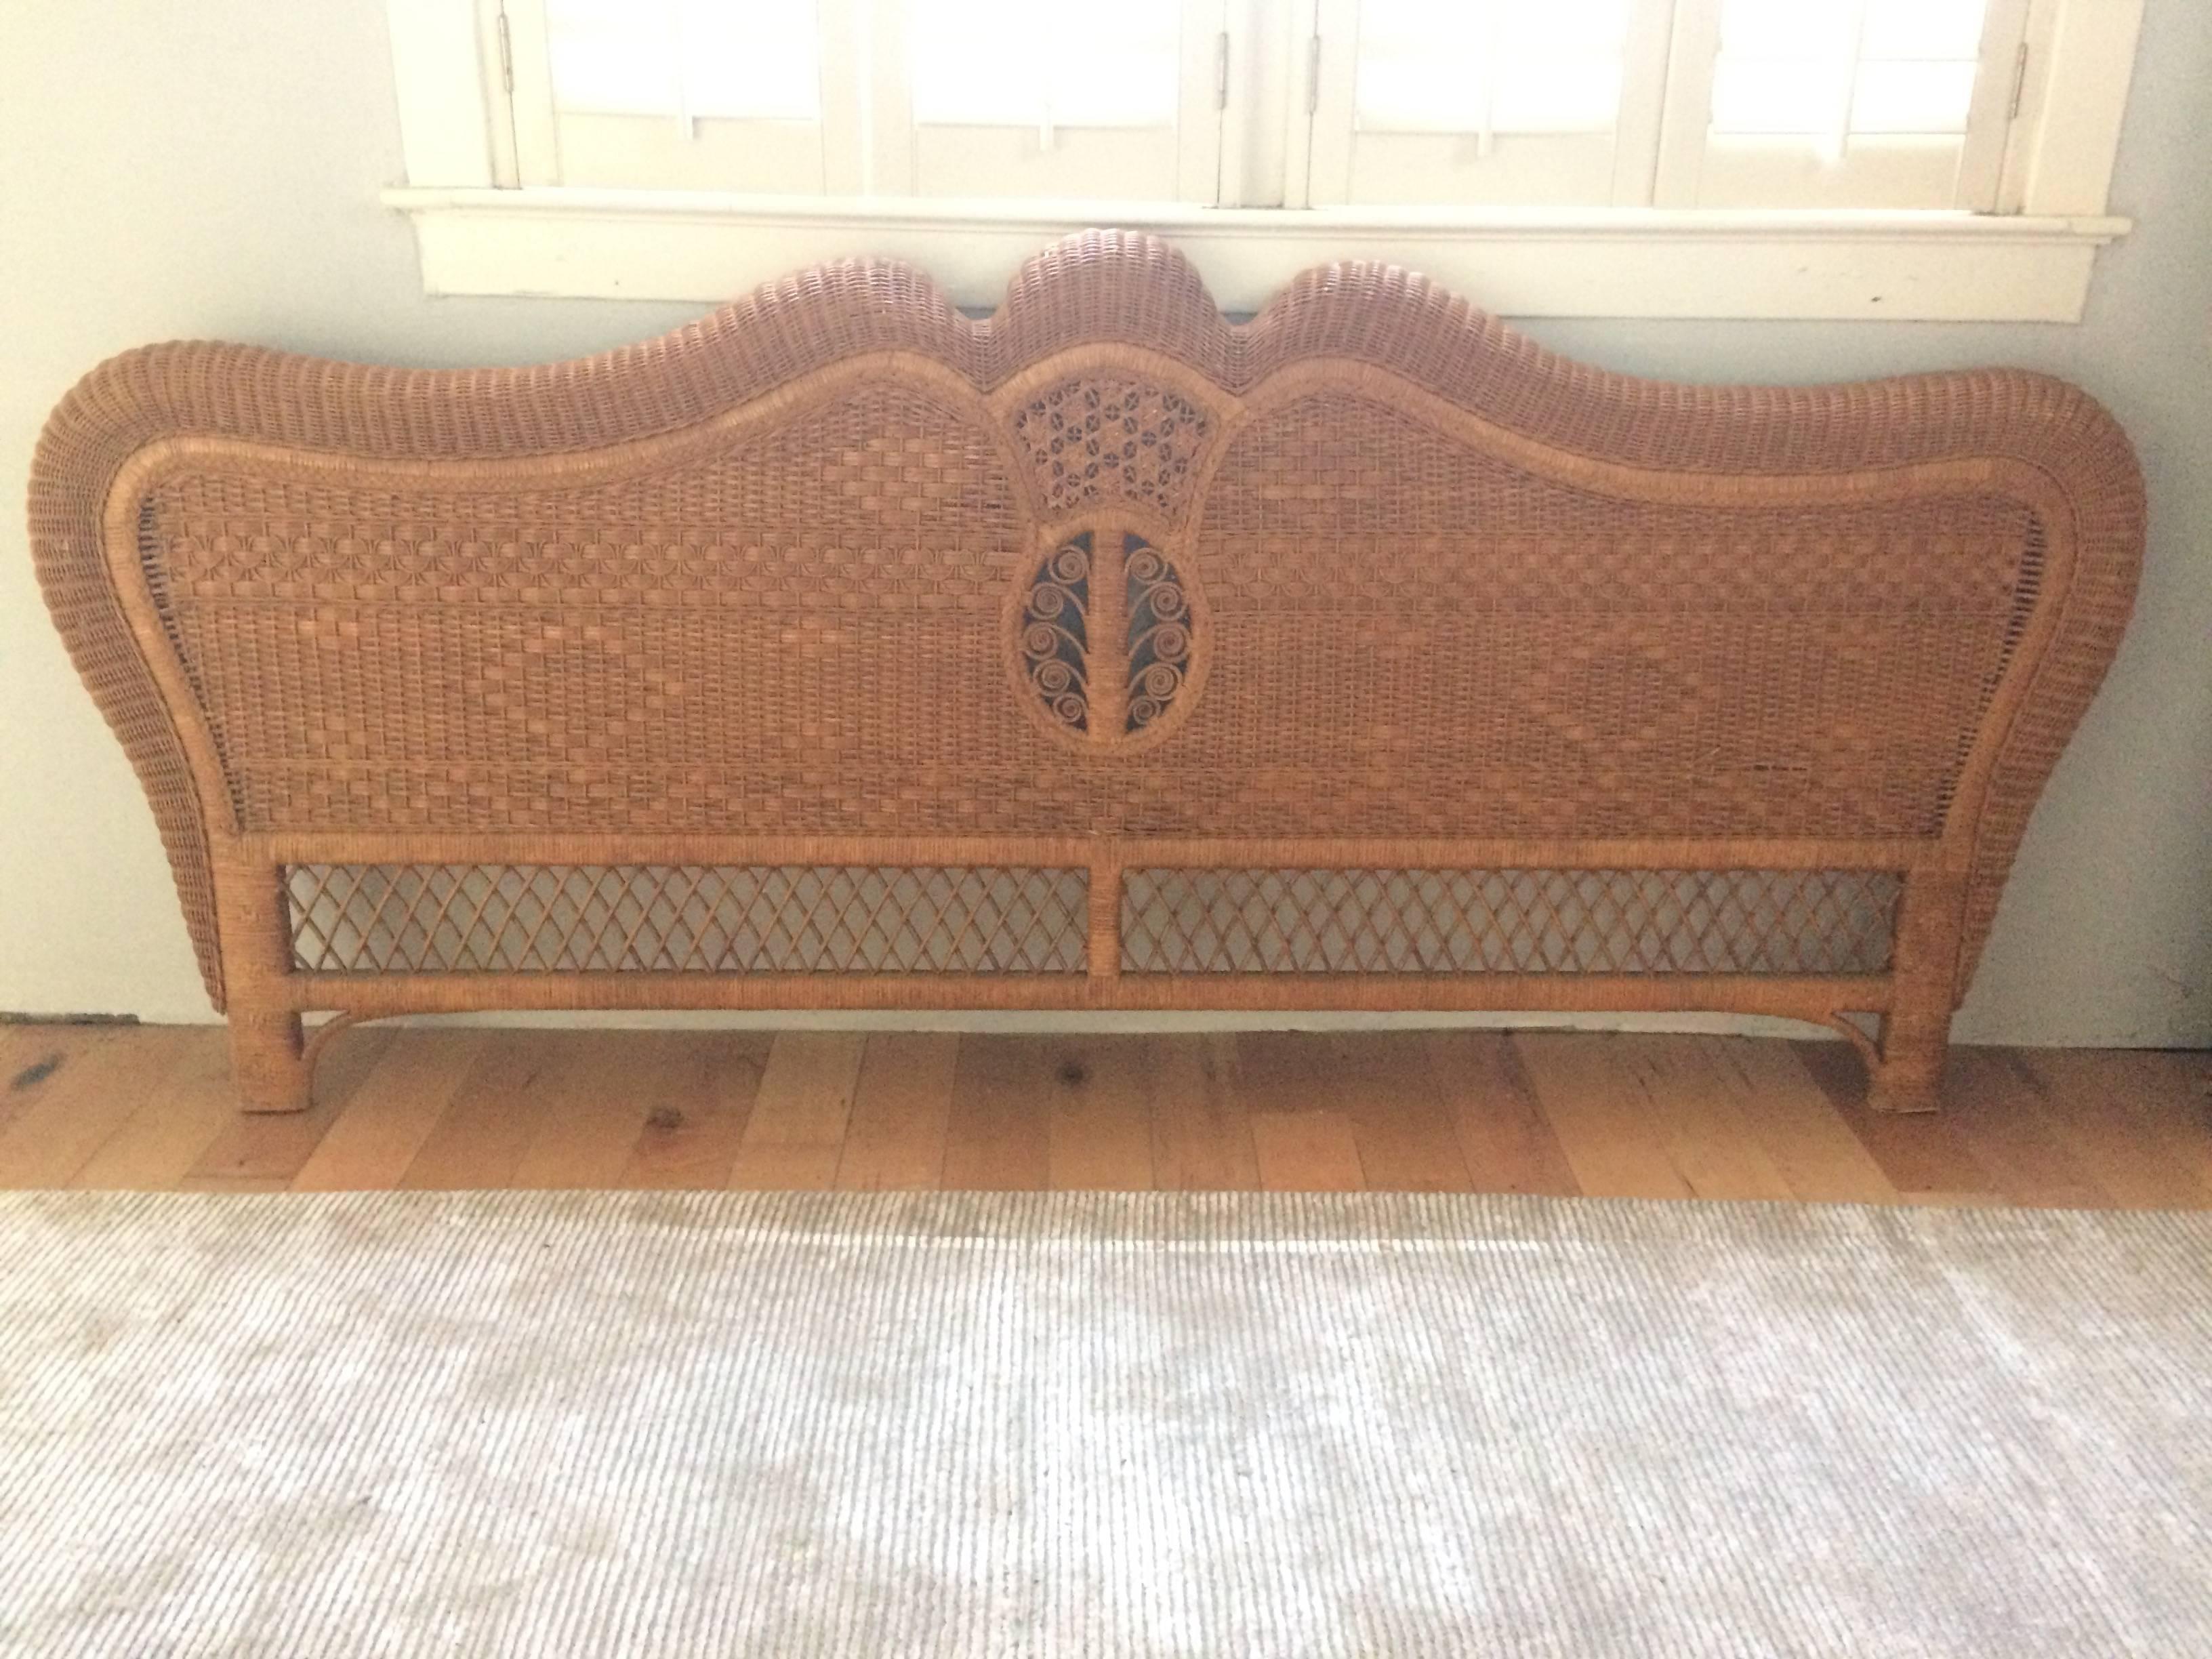 Great looking wicker headboard, footboard and side rails with intricate woven pattern and detailing and lovely curvy Silhouette.
Footboard 41.5 in H, 3 in D, 8 ft L
Side rails 81 in L, 7.5 in H, 1.5